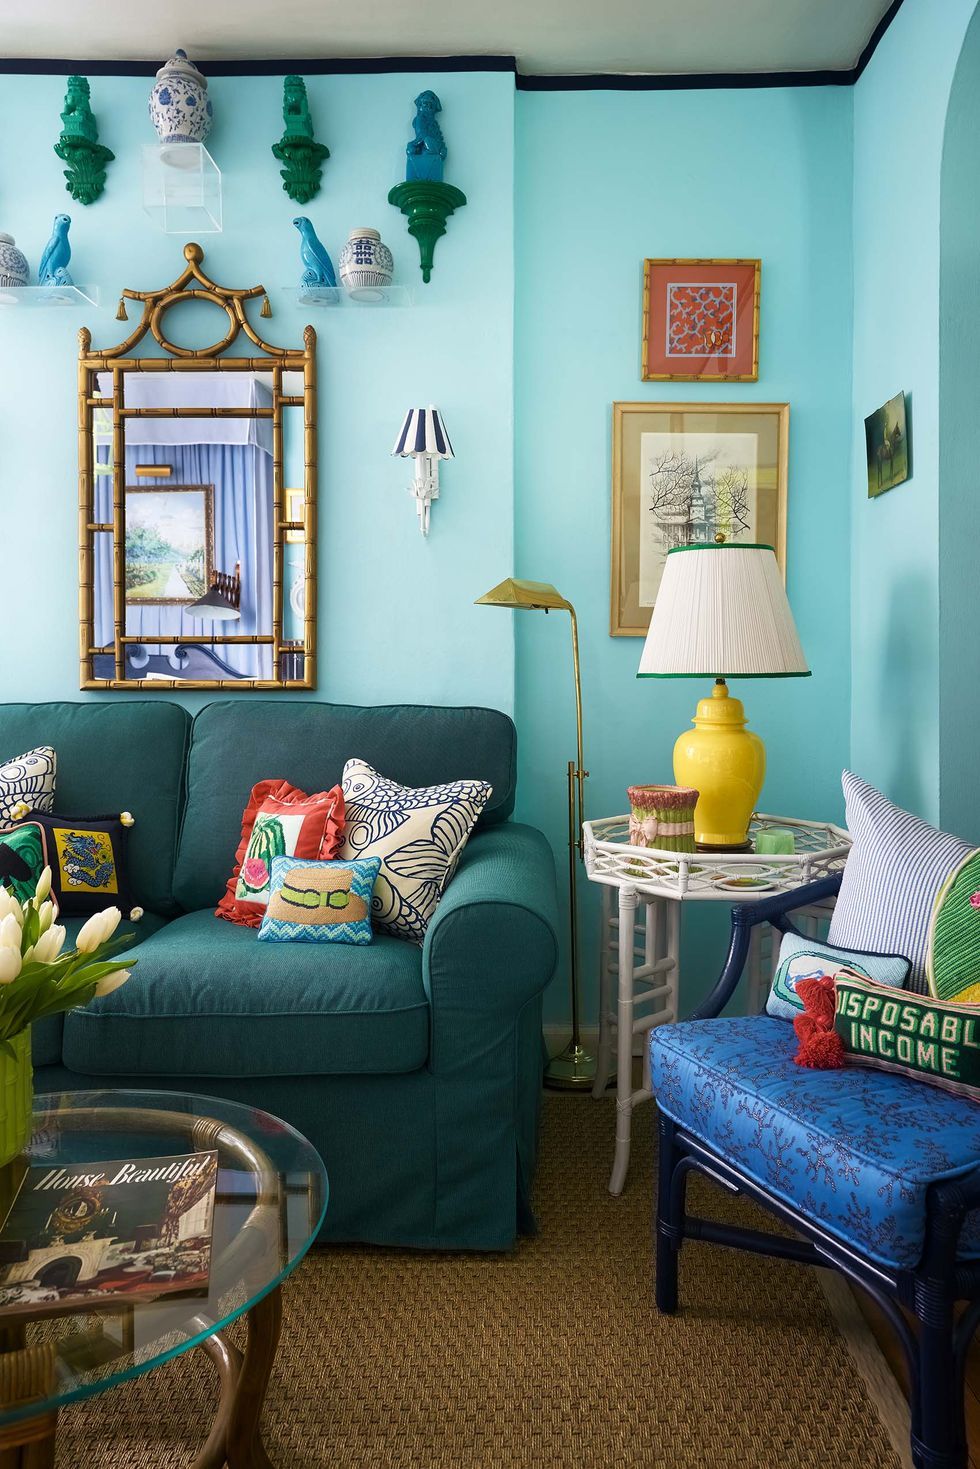 7 Bedroom Paint Colours that look Amazing